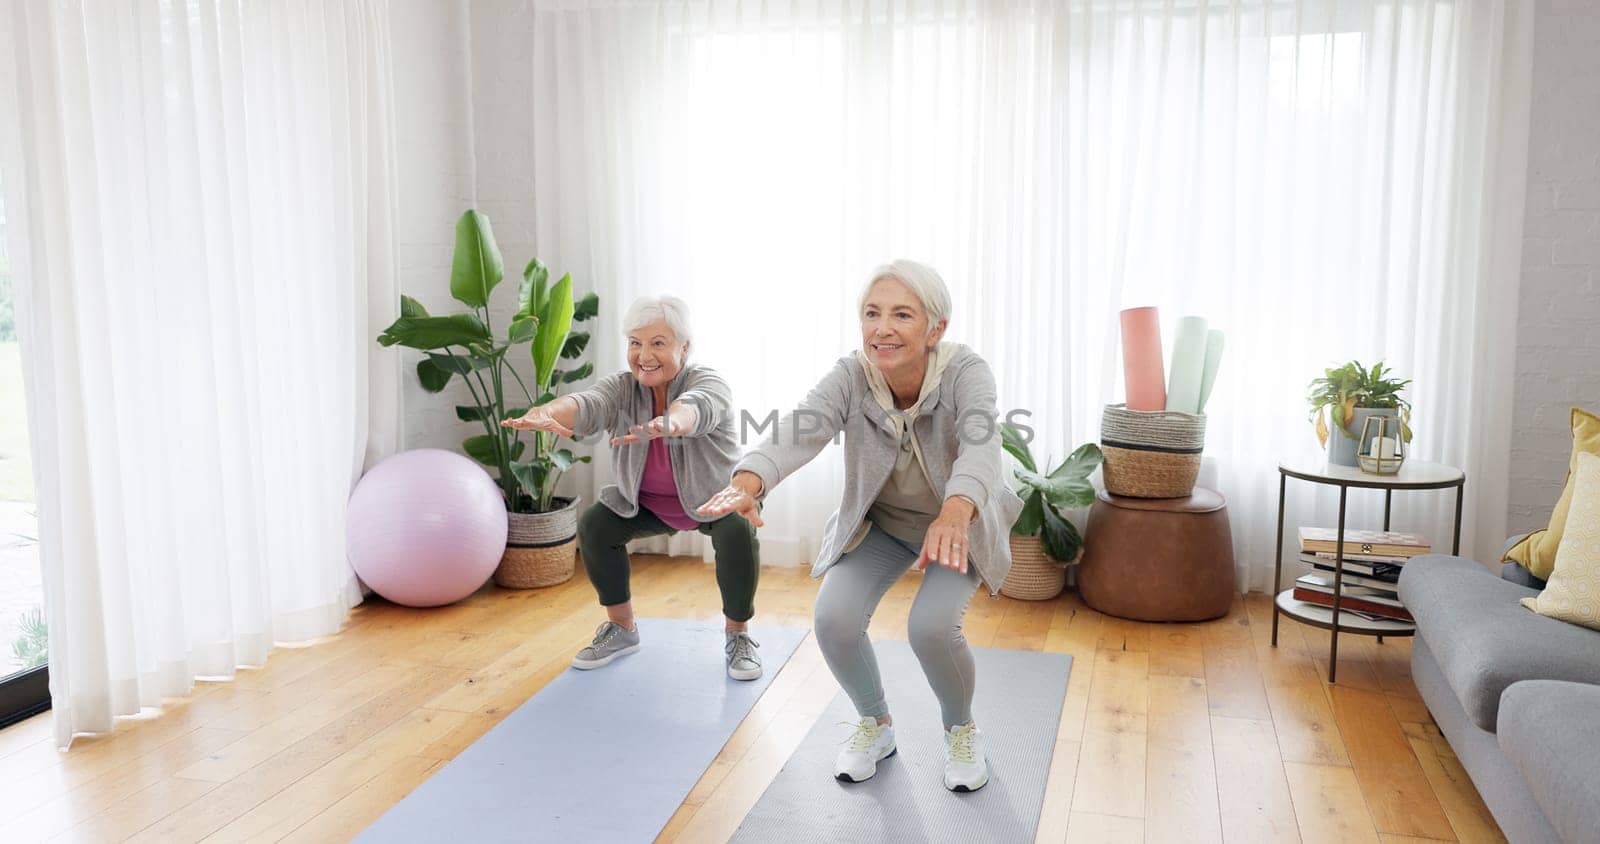 Fitness, yoga and elderly woman friends in a home studio to workout for health, wellness or balance. Exercise, zen and chakra with senior people training for mindfulness together while breathing.